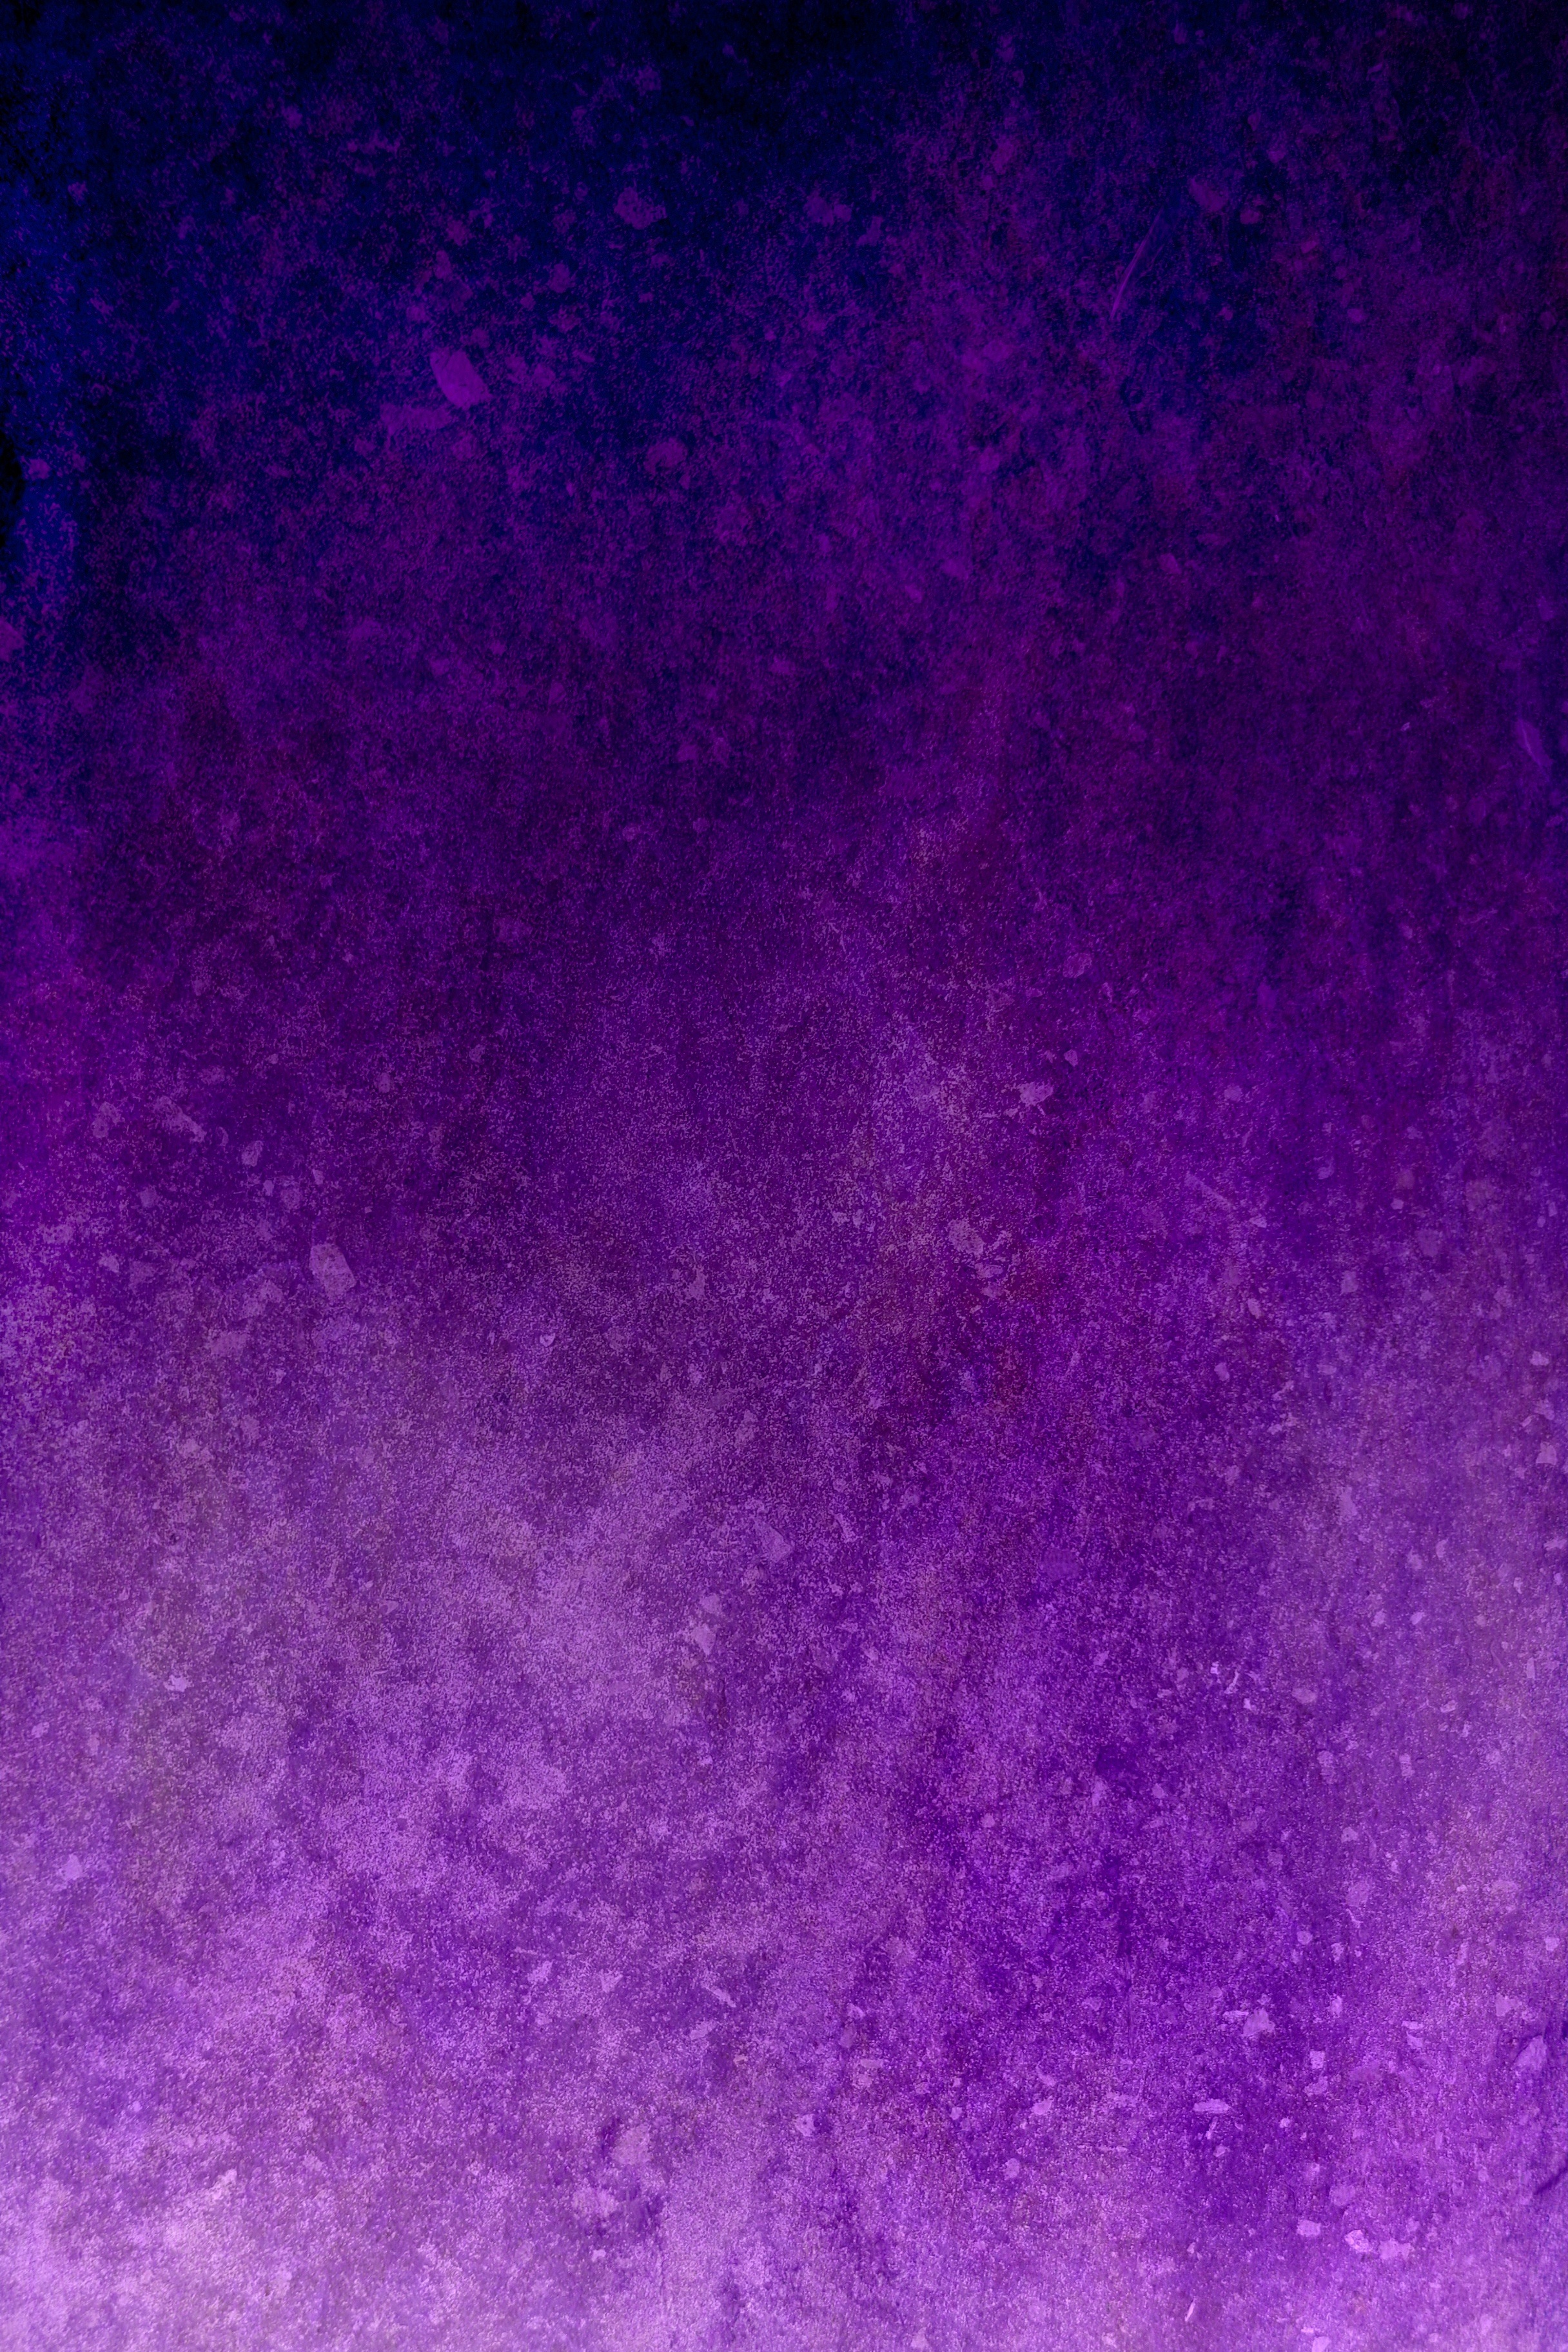 purple, textures, background, violet, texture, stains, spots, shade, tint